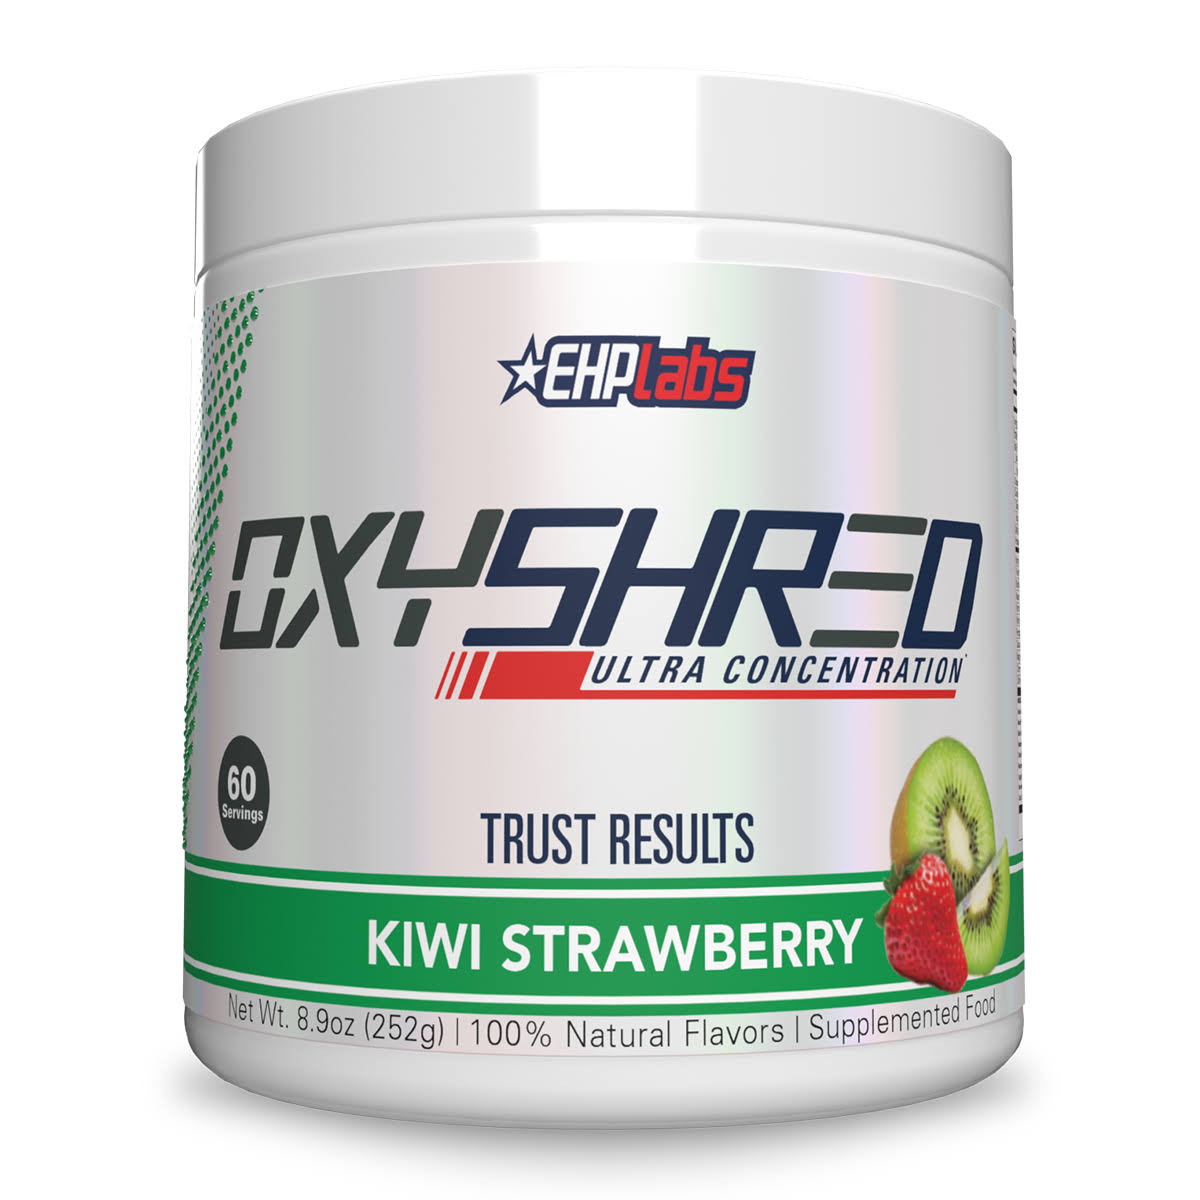 EHP Labs Oxyshred Ultra Concentration Kiwi Strawberry 60 Servings